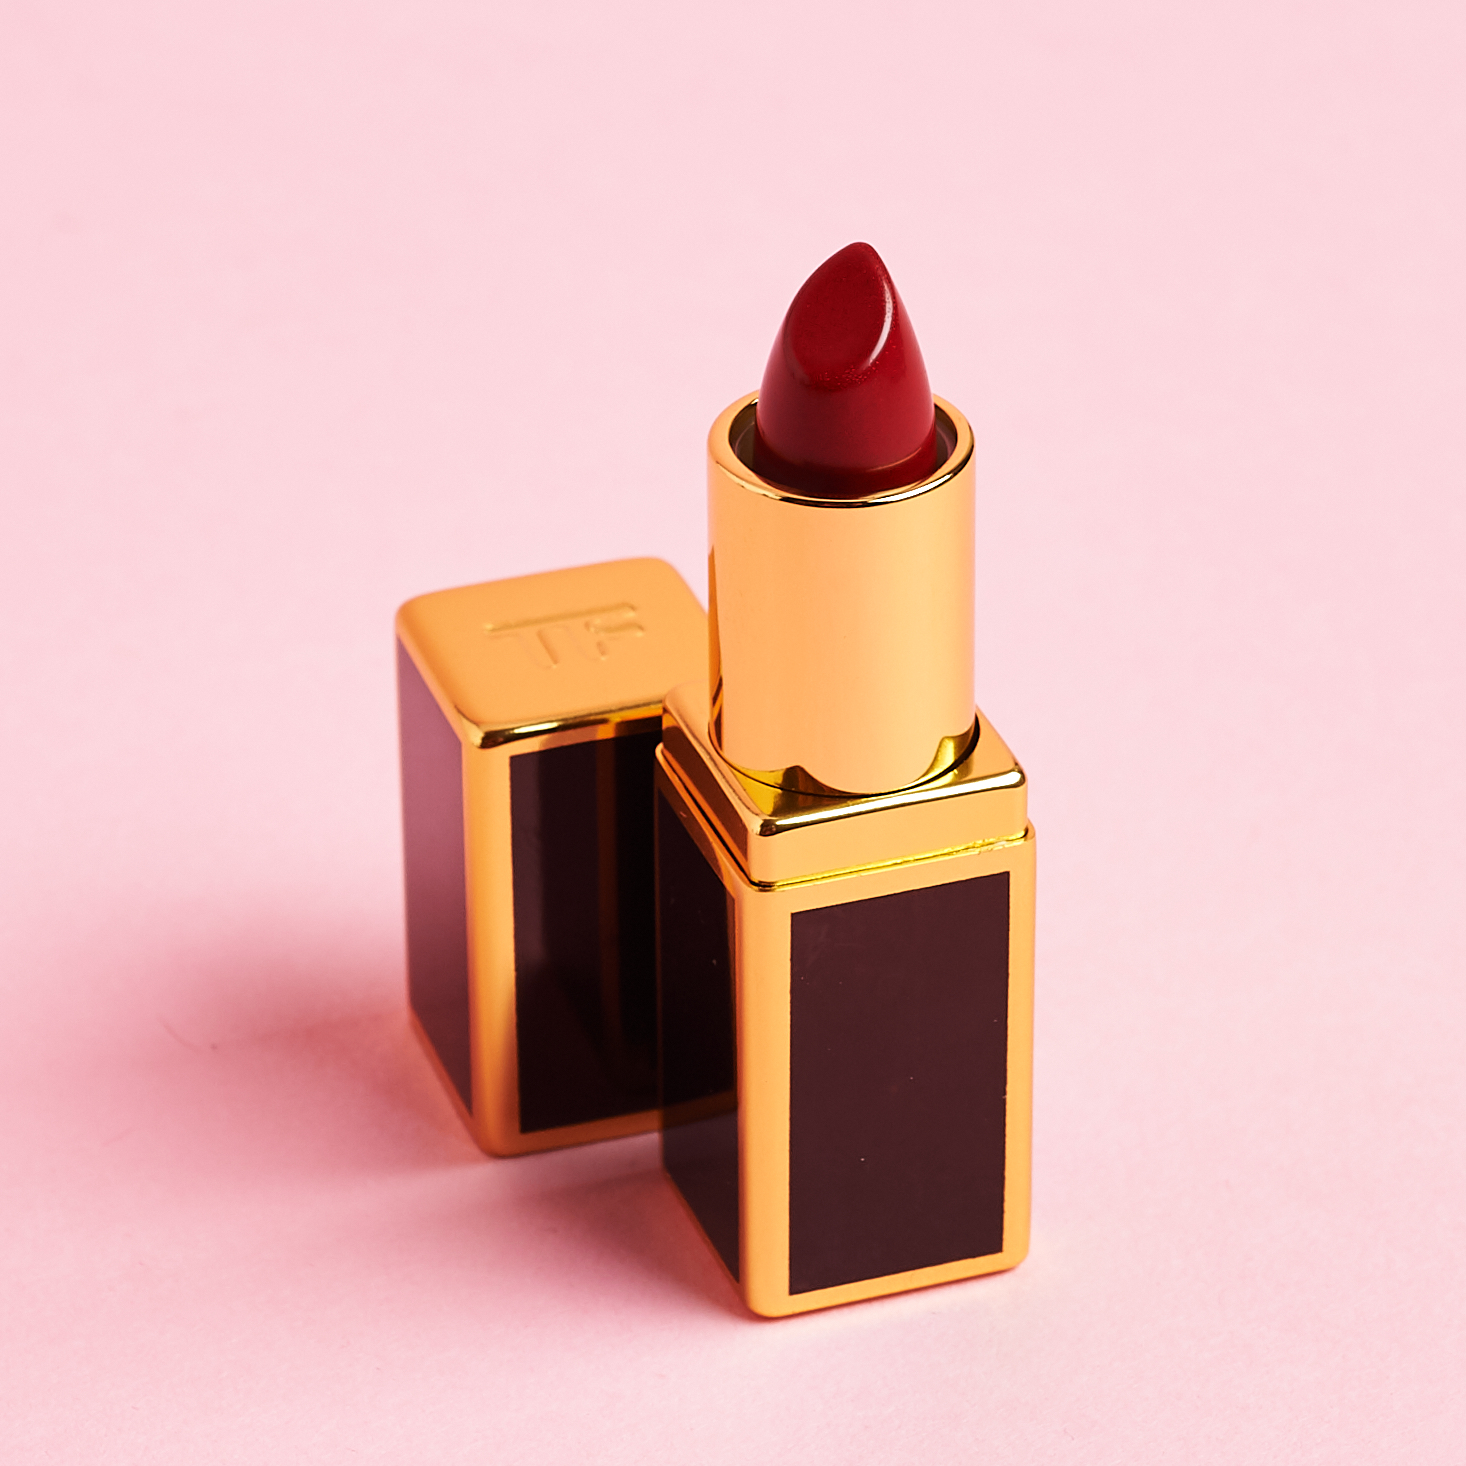 TOM FORD Lip Color Lipstick with lid off